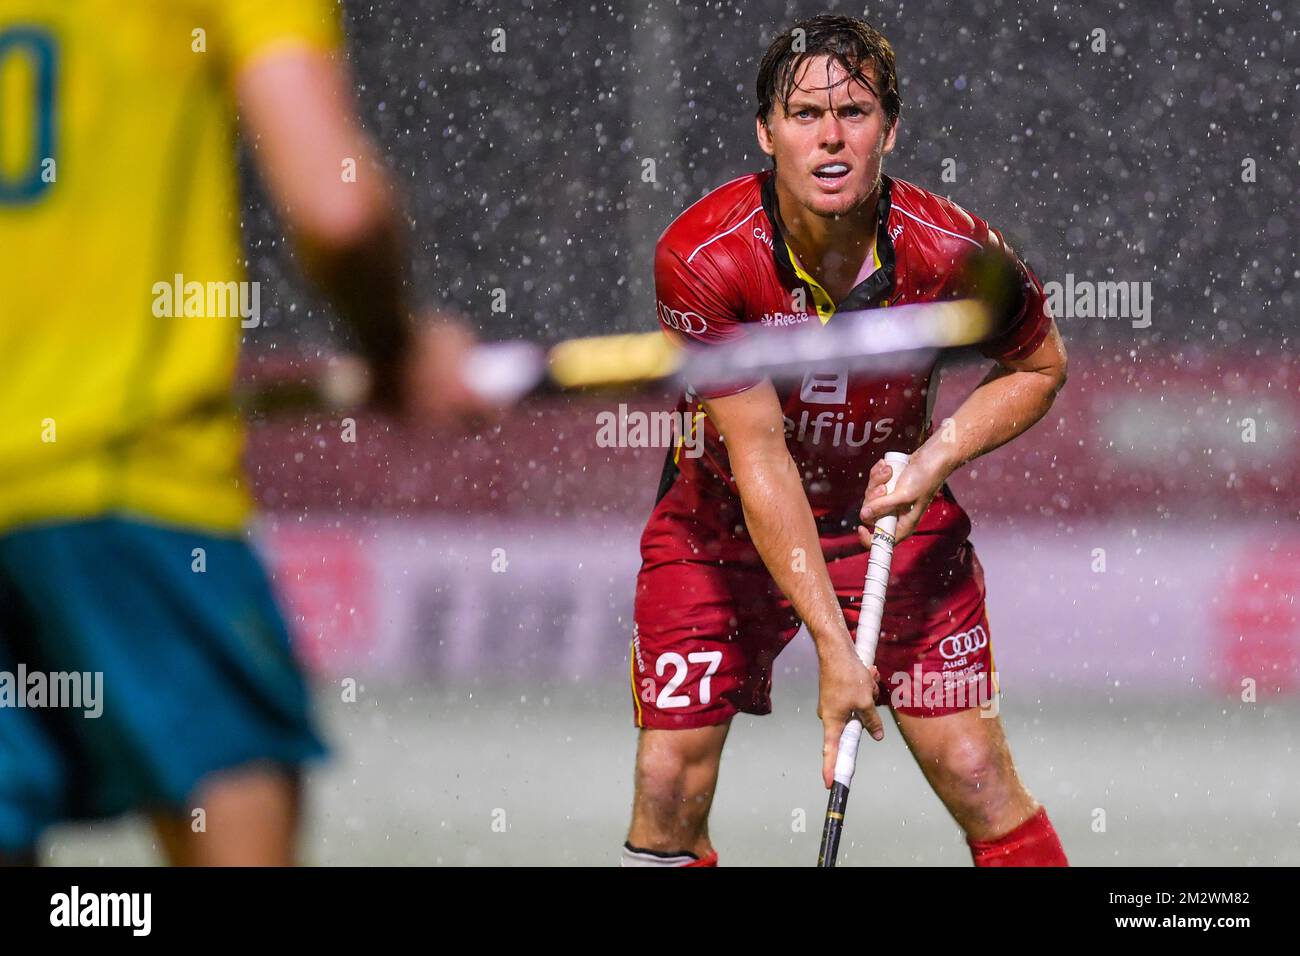 Belgium's Tom Boon pictured during a field hockey game between Belgium's national team Red Lions and Australia, Wednesday 19 June 2019 in Wilrijk, Antwerp, game 13/14 of the men's FIH Pro League competition. BELGA PHOTO LUC CLAESSEN Stock Photo